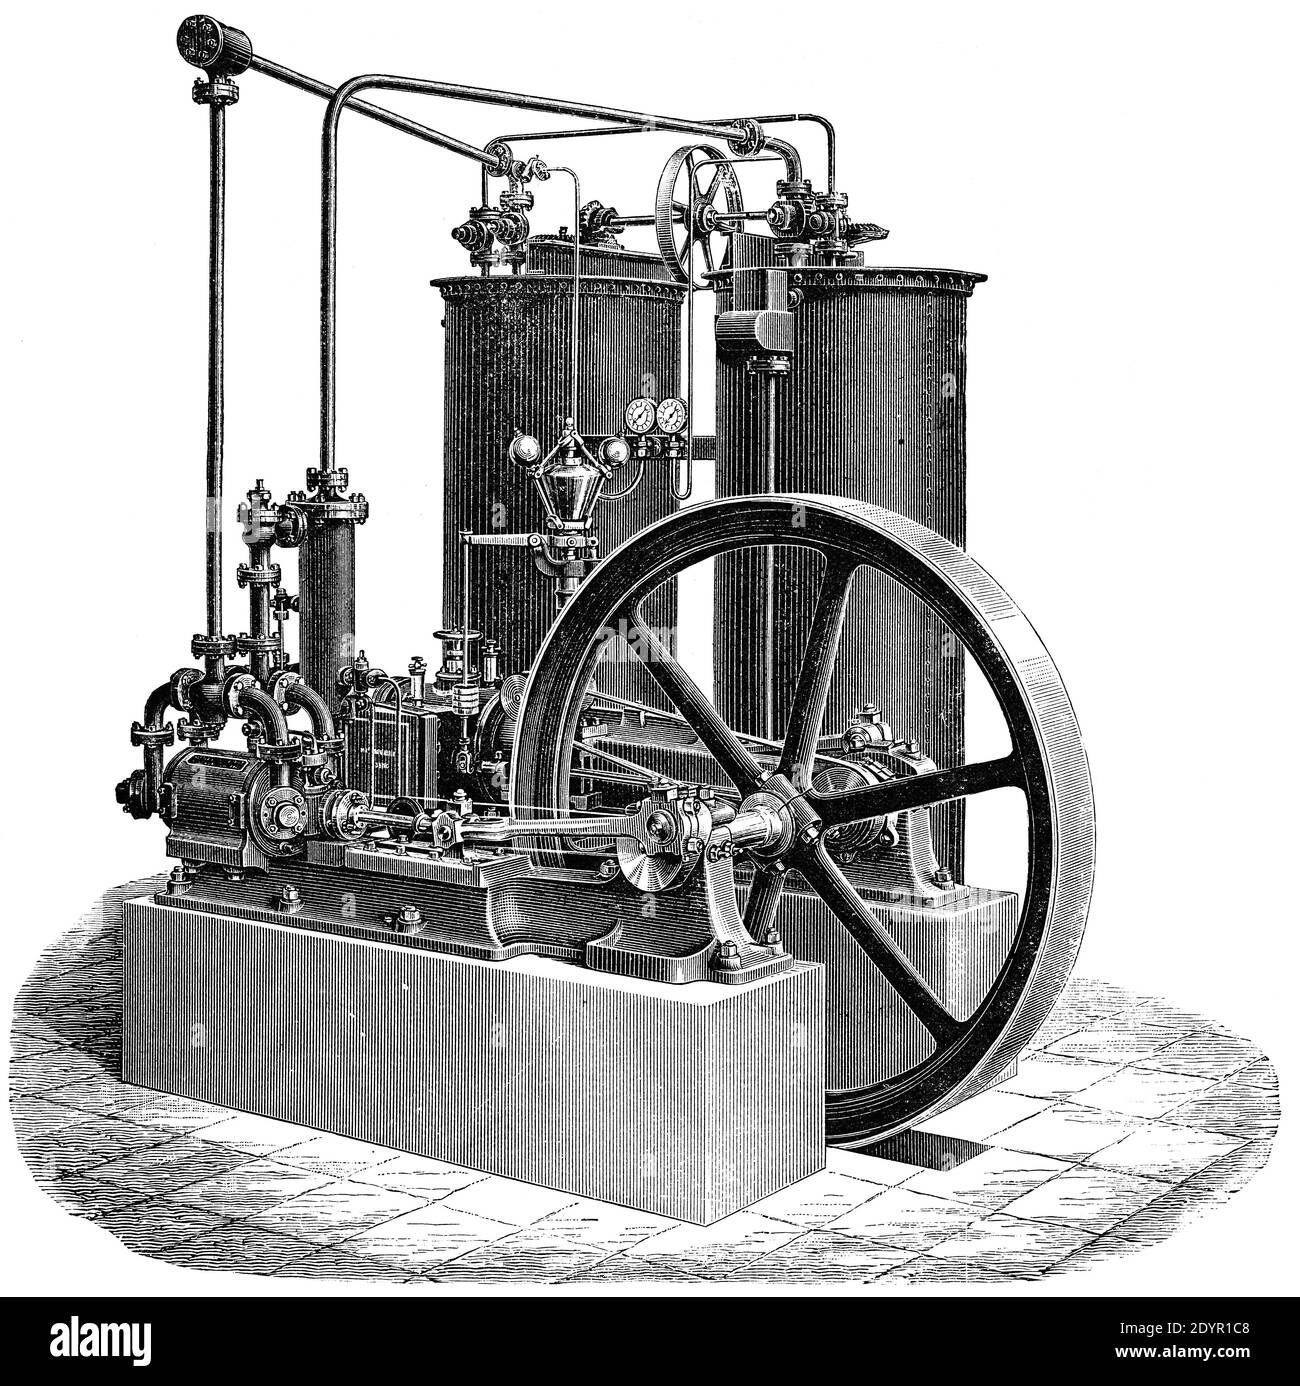 Vertikal twin engine with valve control. Illustration of the 19th century. Germany. White background. Stock Photo